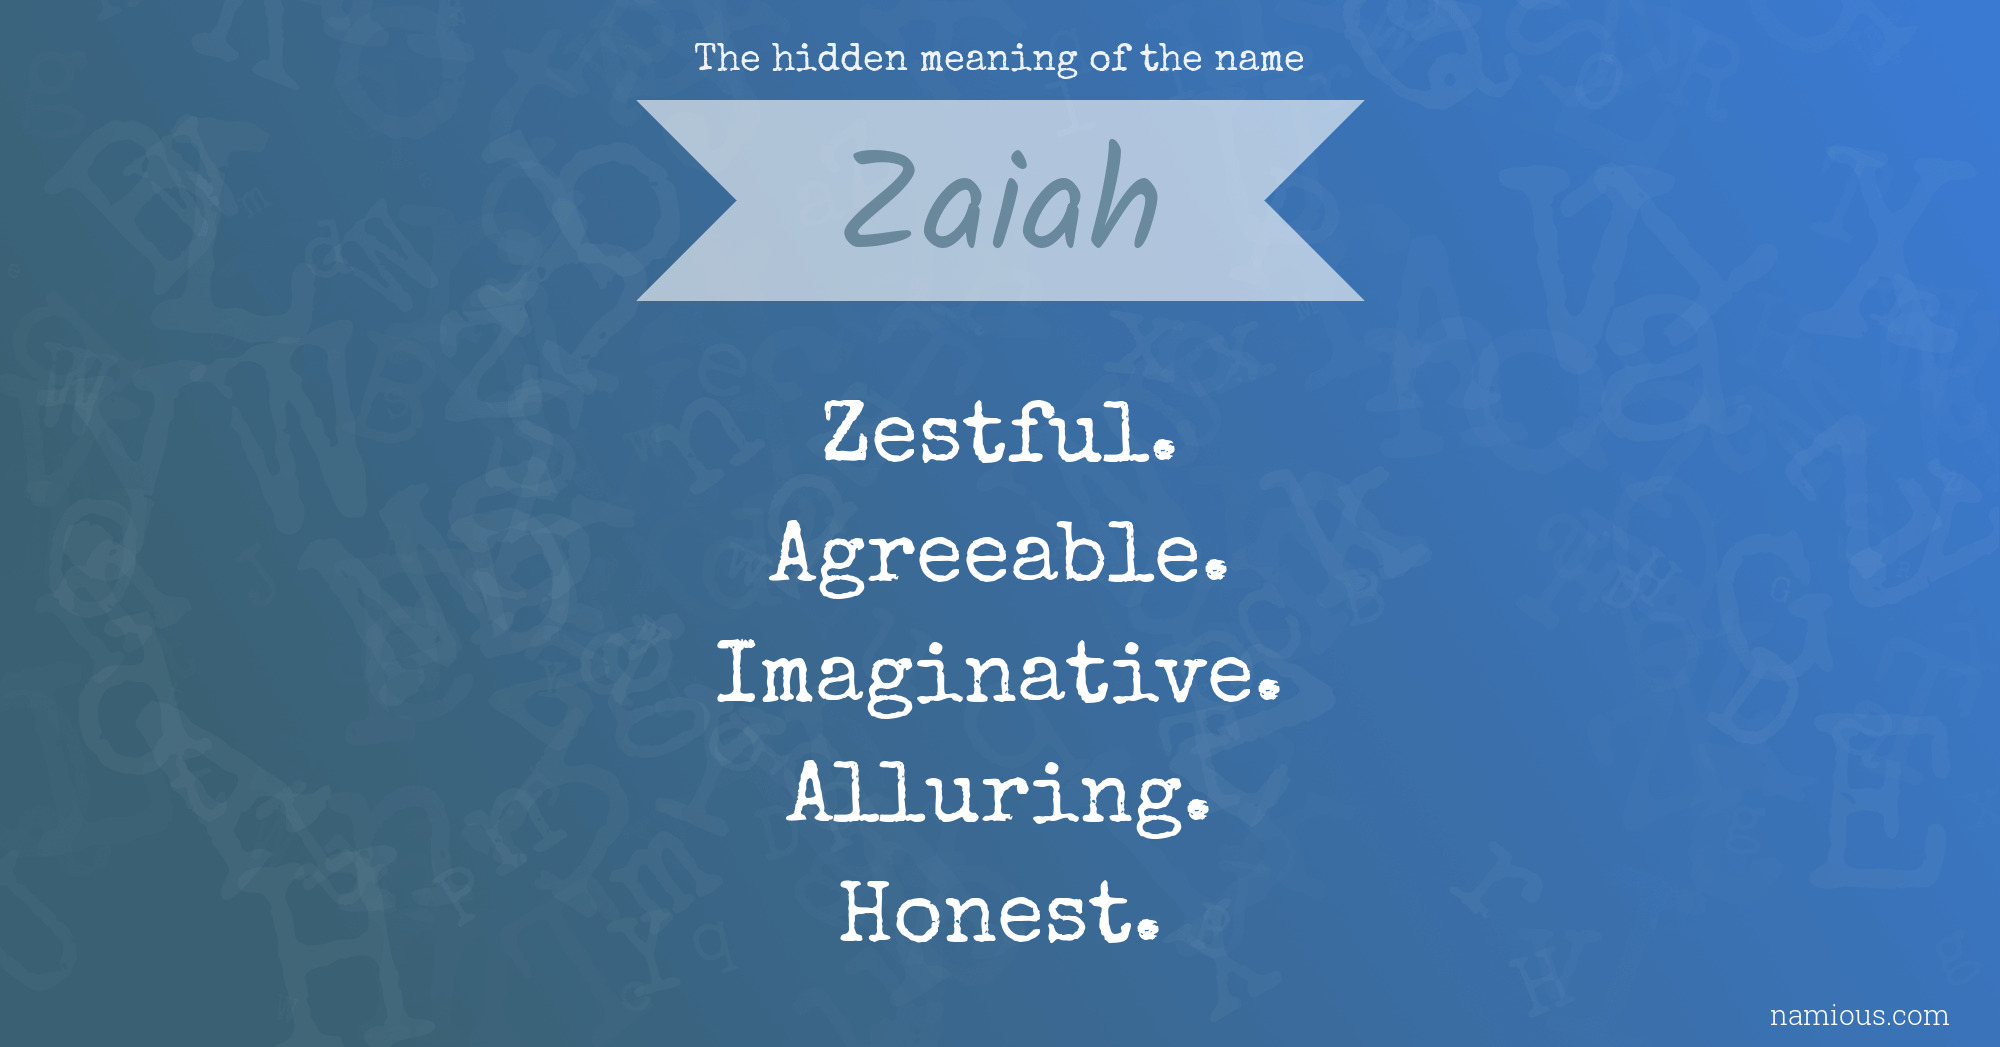 The hidden meaning of the name Zaiah